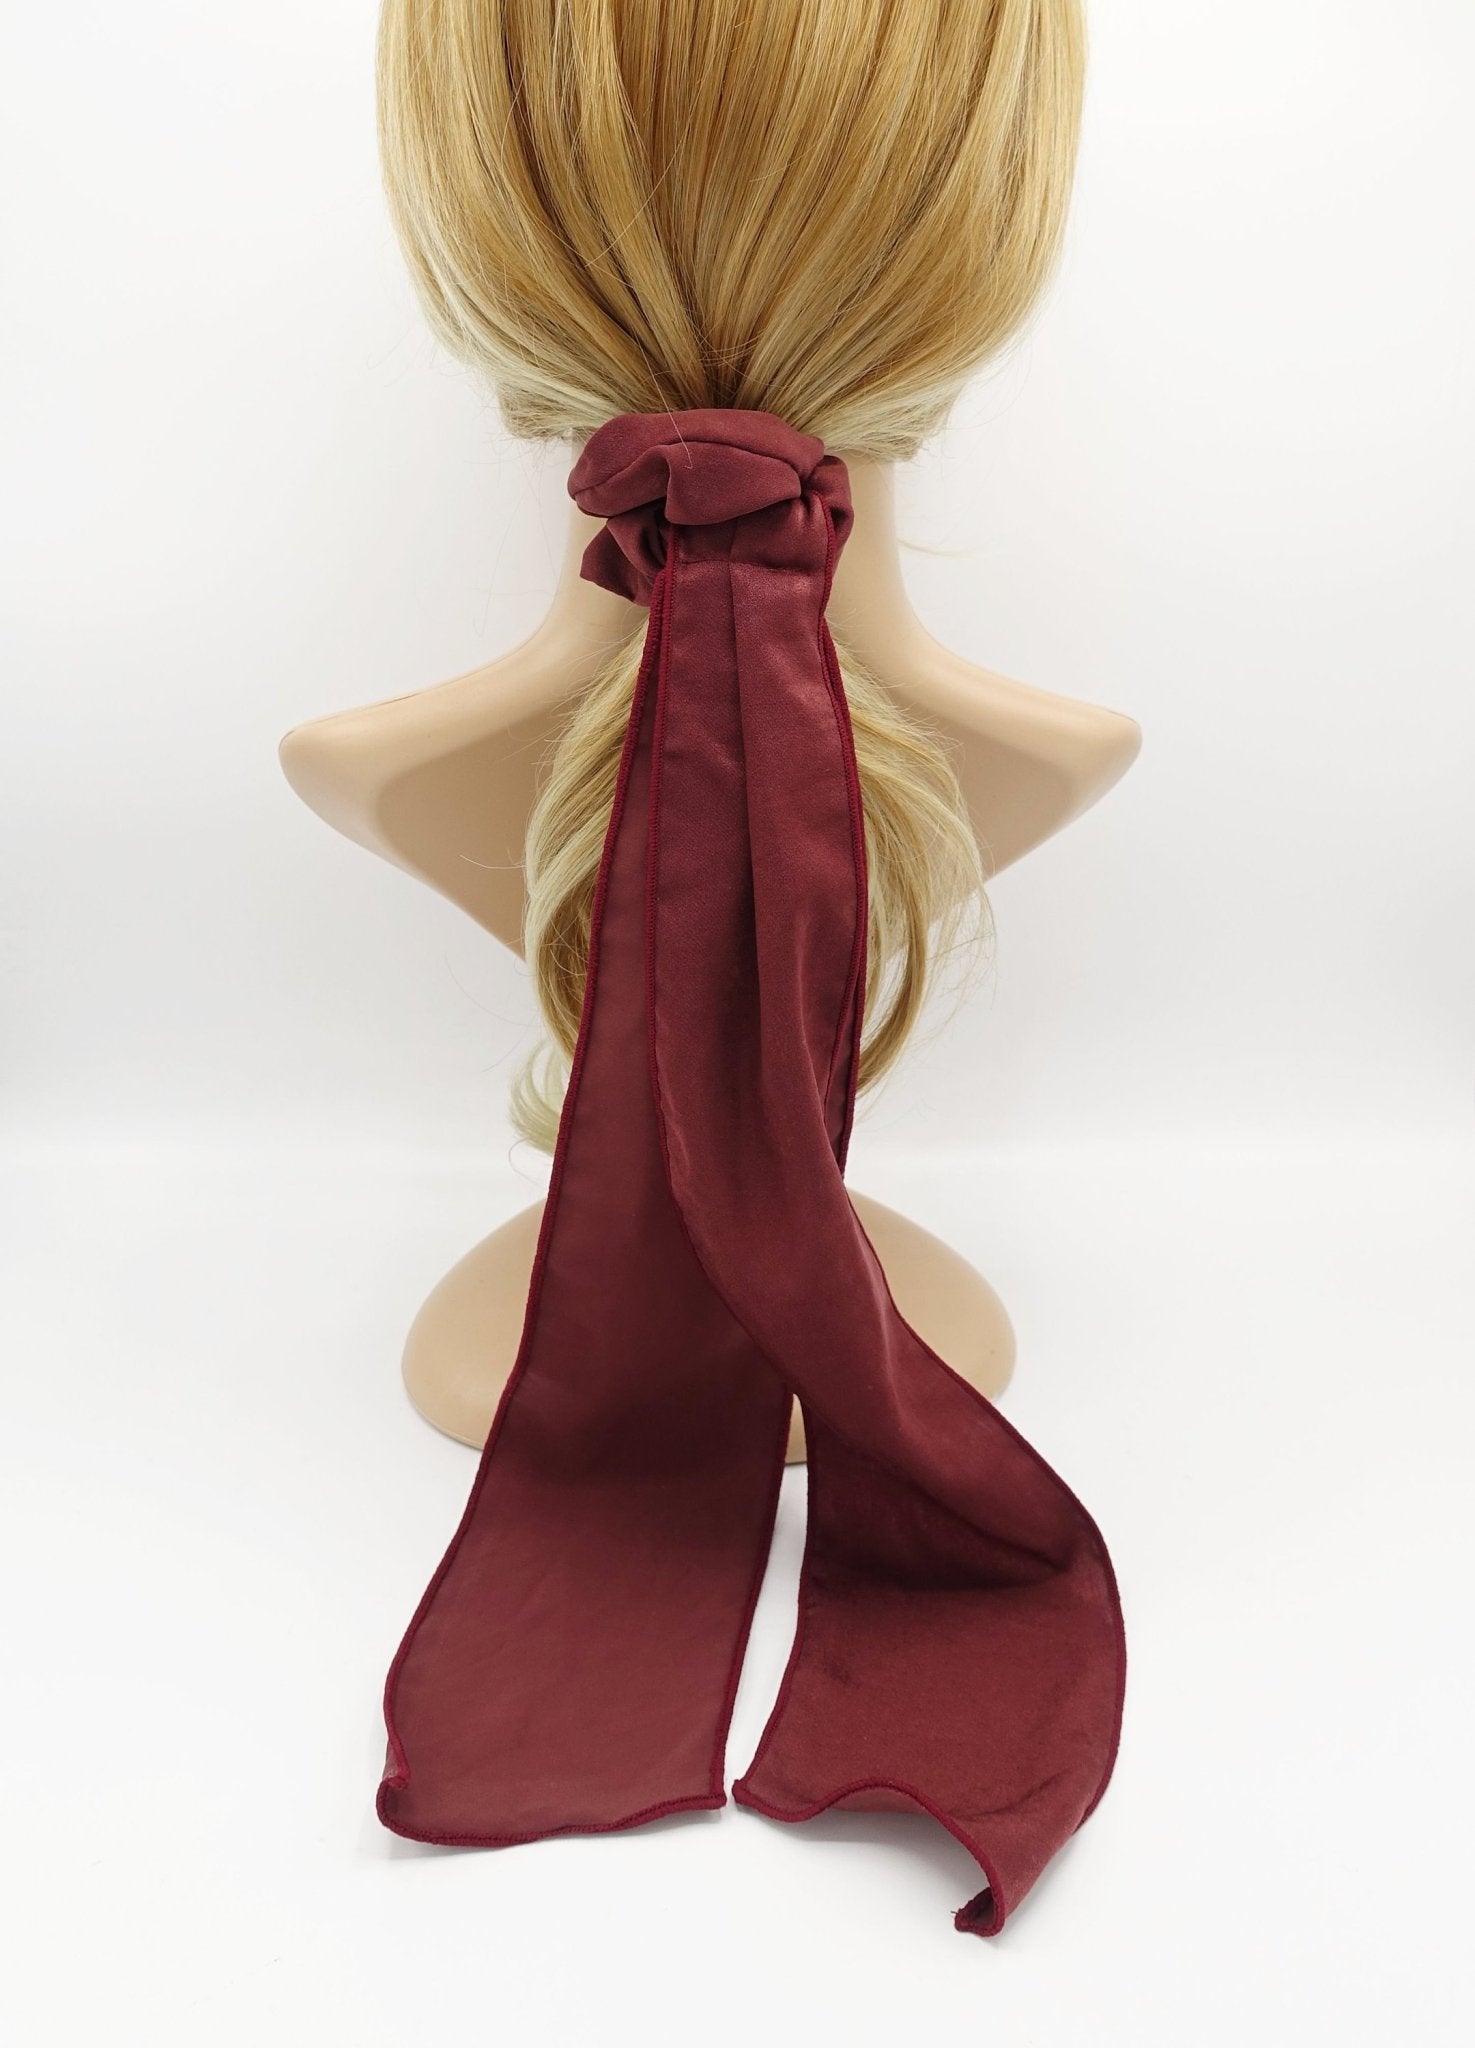 VeryShine scrunchies/hair holder Red wine glossy long tail scrunchies bow knot hair elastic stylish ties women hair accessory